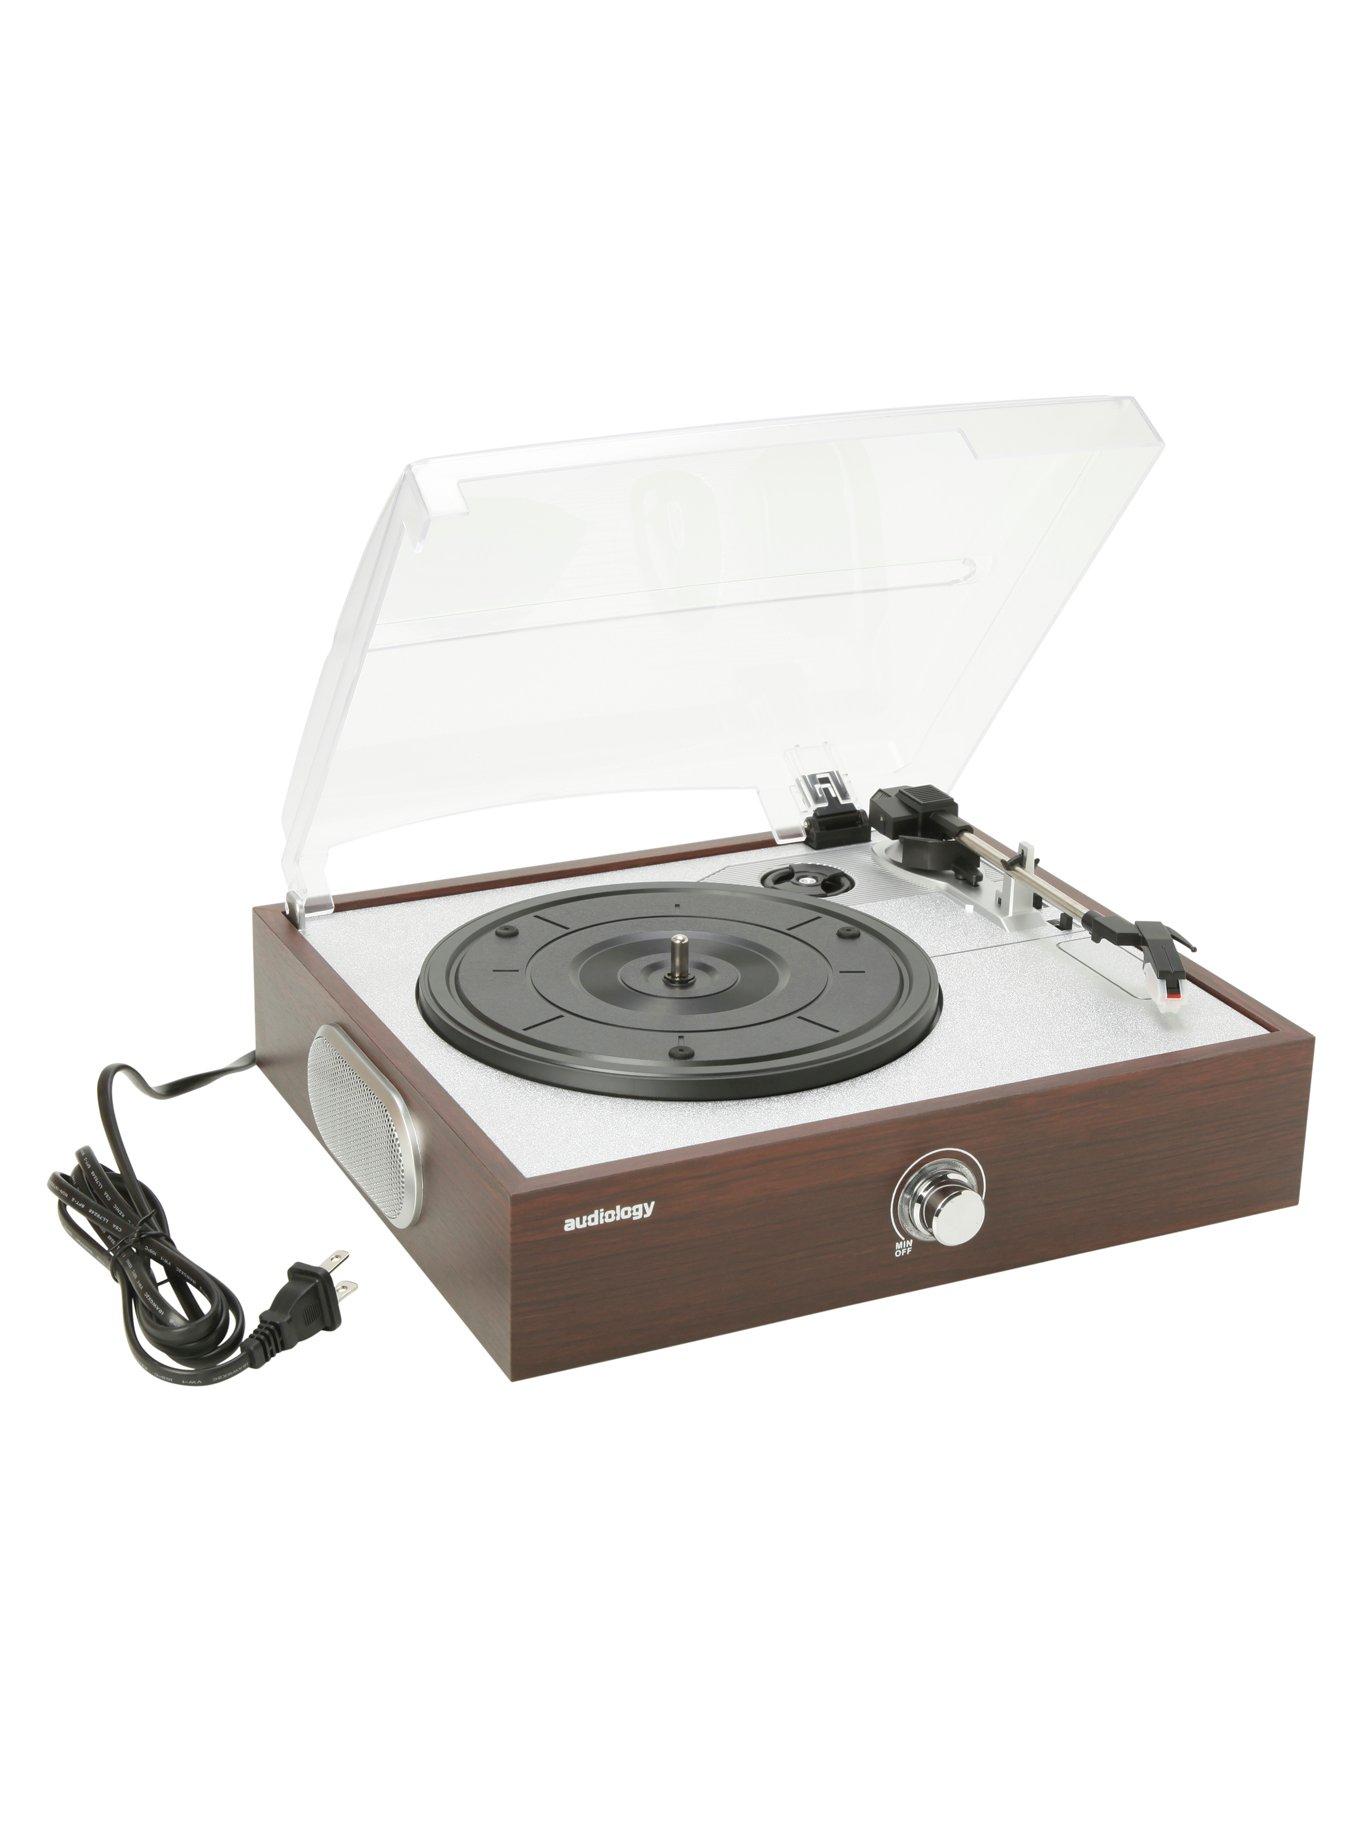 Audiology USB Turntable, , hi-res